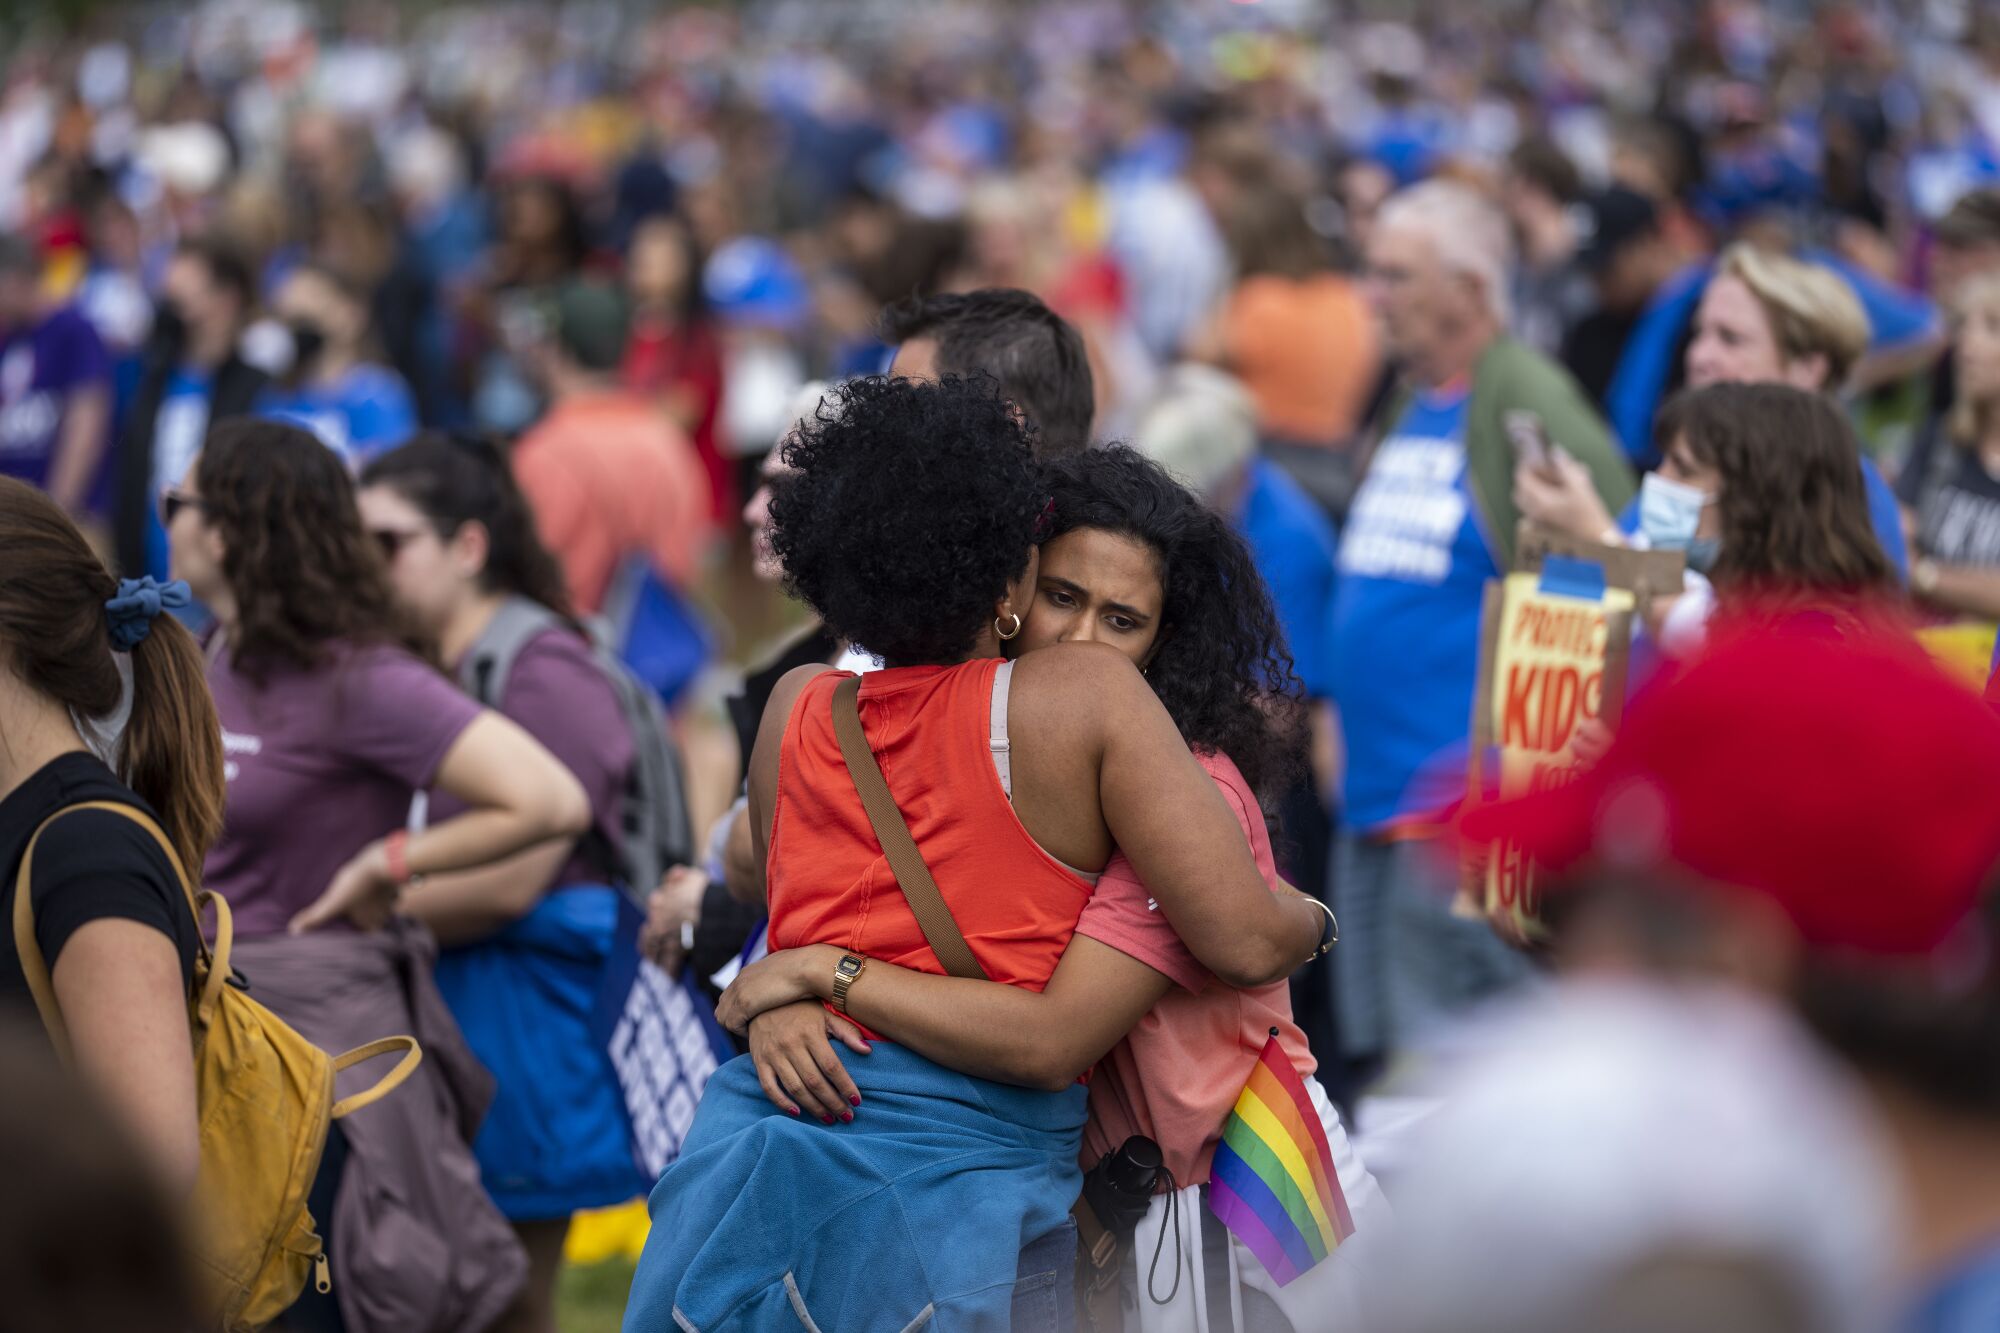 People comfort each other after a man charged the main stage.